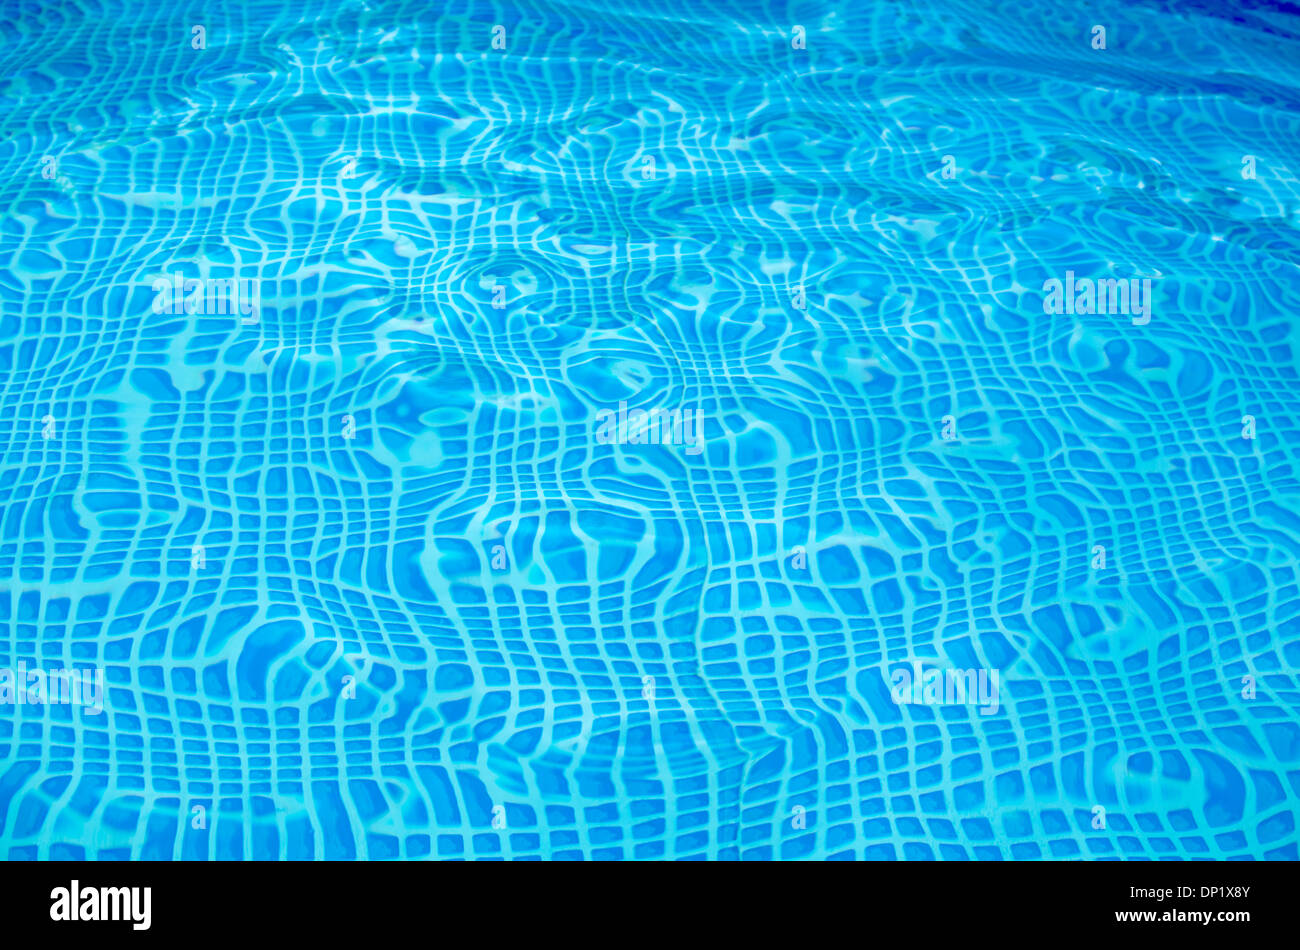 Abstract Blue Checked Bottom of a Wavy Pool 1 Stock Photo